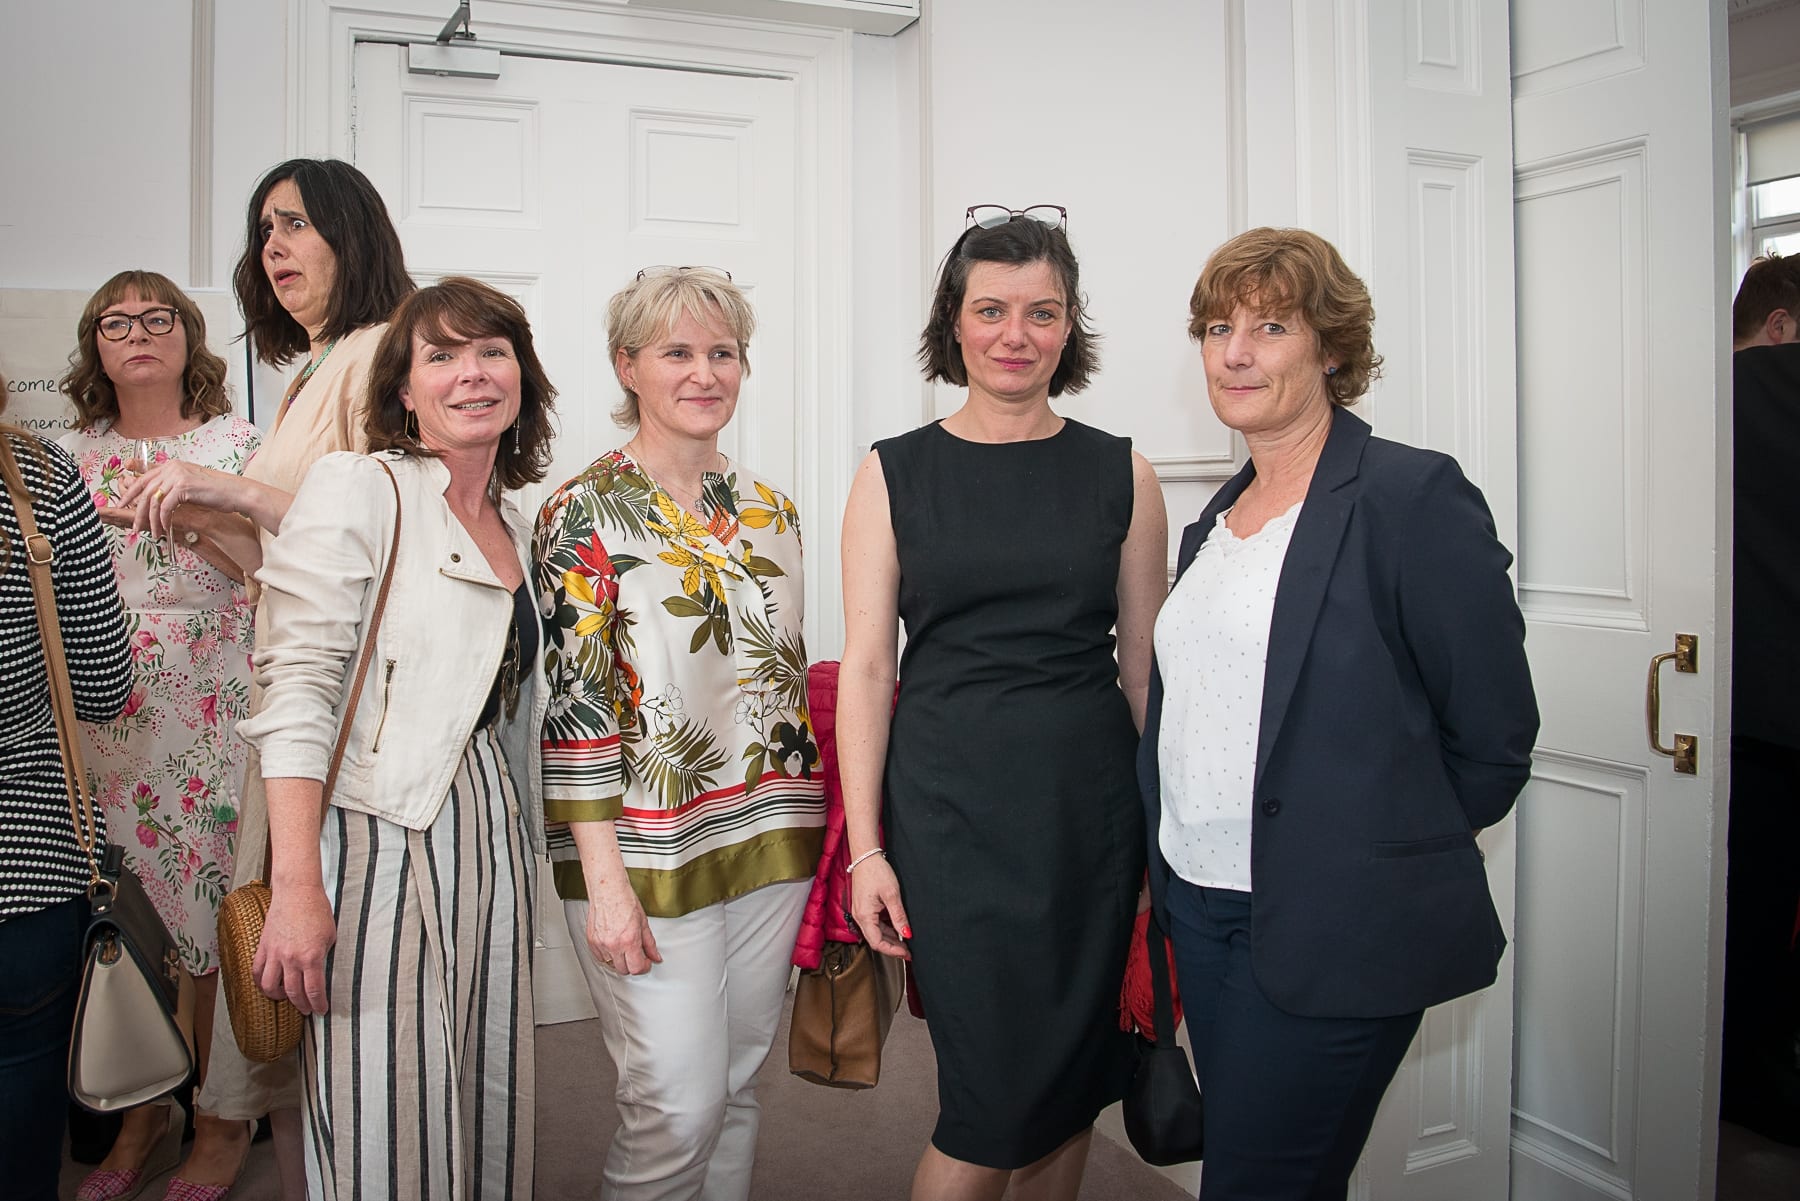 no repro fee- 
From Left to Right:  French Embassy Event which took place on the 18th June in the Limerick Chamber Boardroom:  Anne Blondelle - Alliance Française de Limerick, Rose Roche- Flam, Laurence Diggins - Flam, Jill Cousins - Hunt Museum. 
Photo by Morning Star Photography